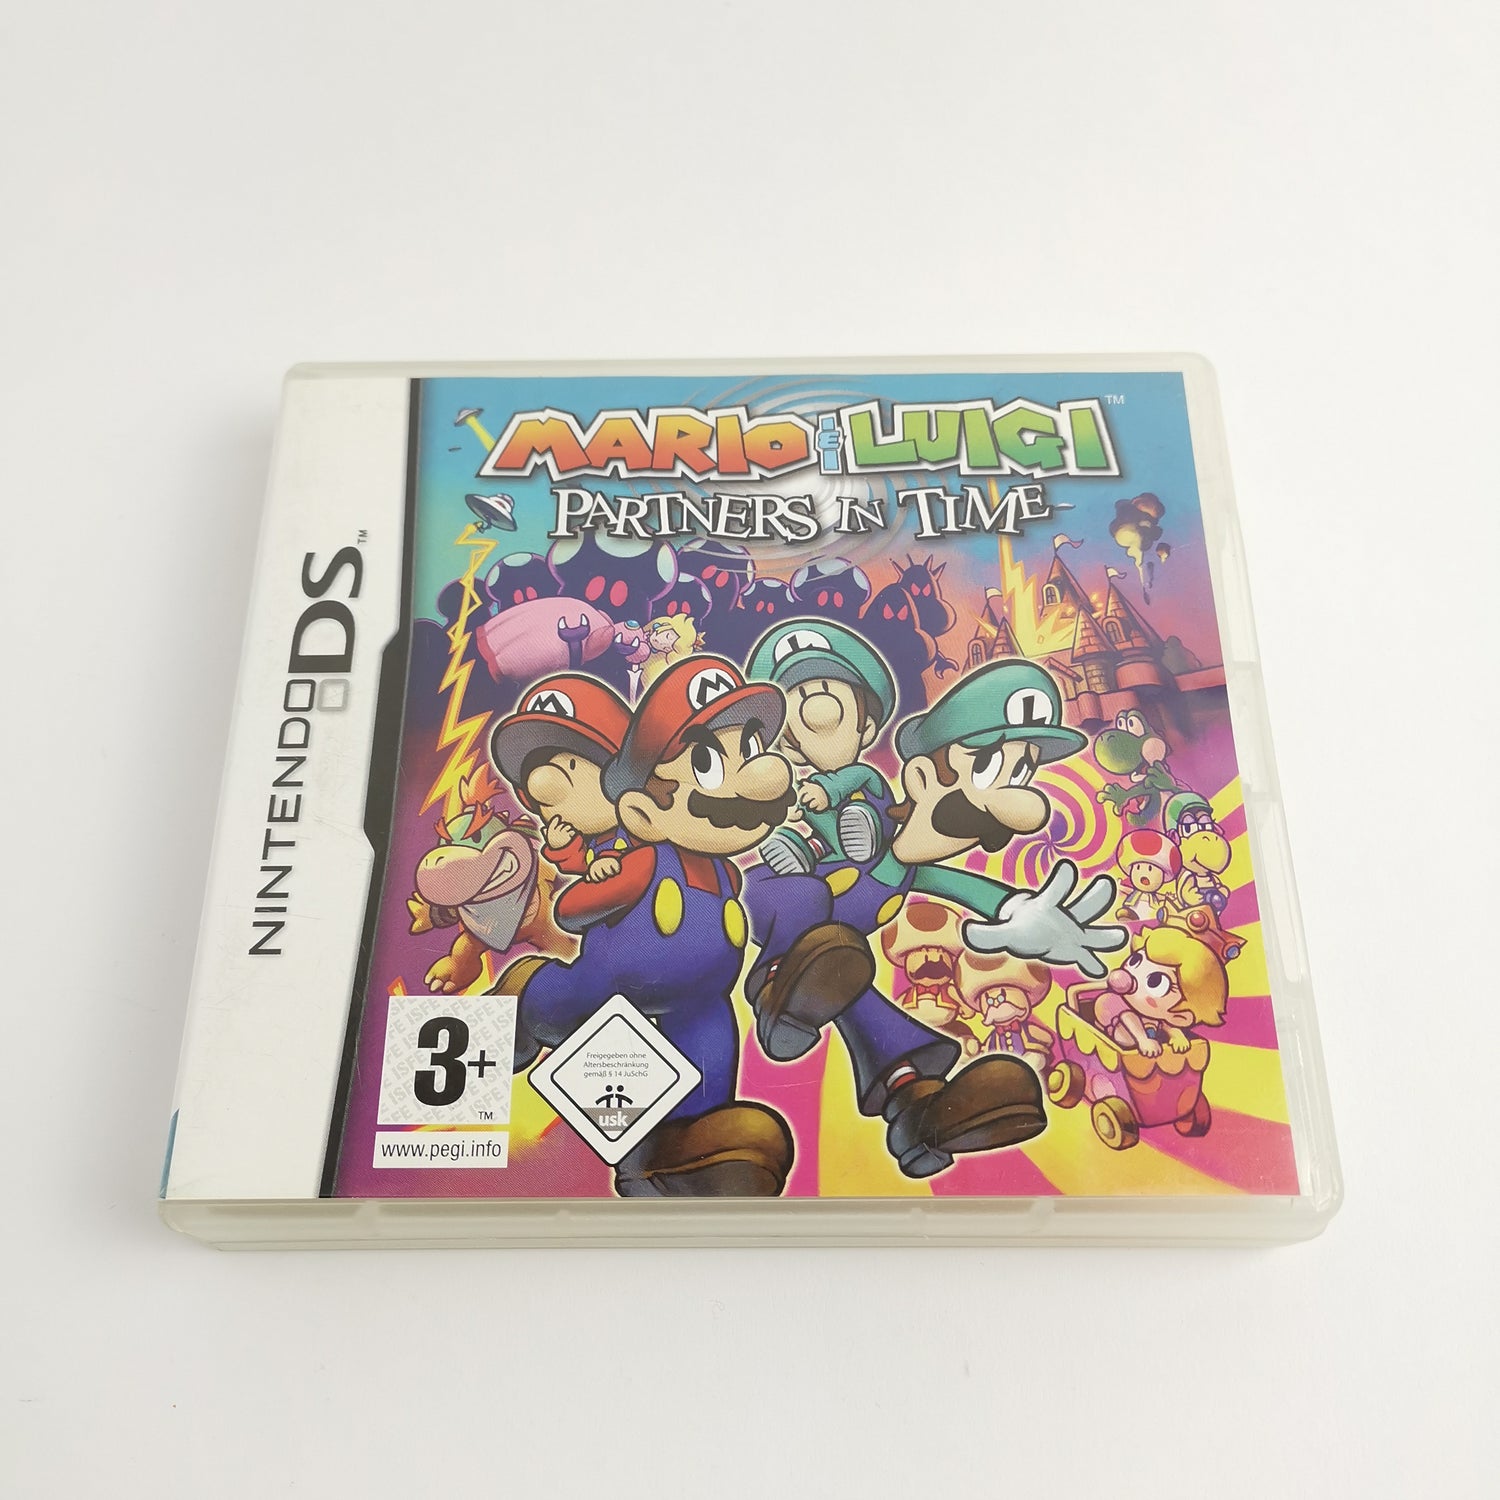 Nintendo DS Game: Mario & Luigi Partners in Time + Official Guide (USA) | Original packaging